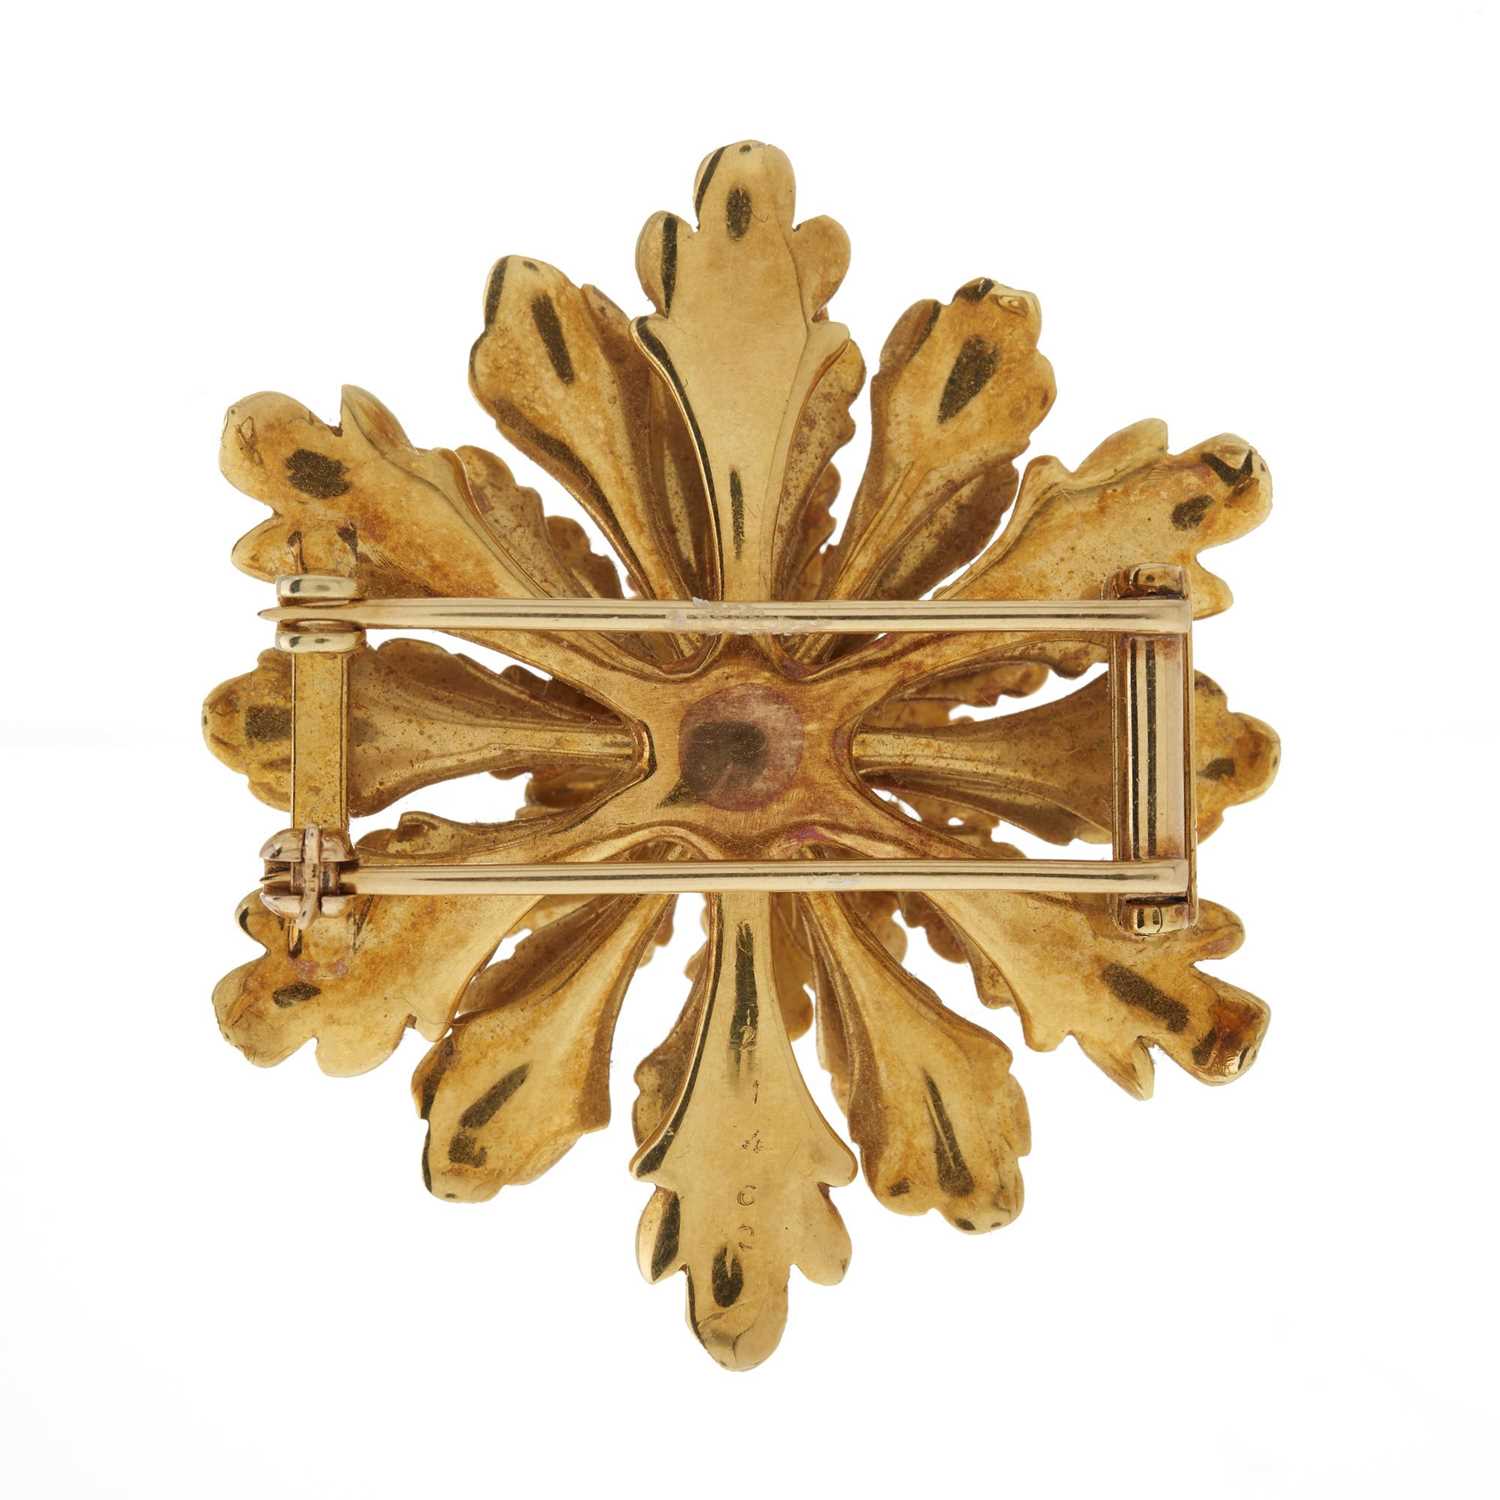 Cartier, a mid 20th century 18ct gold flower brooch - Image 2 of 2